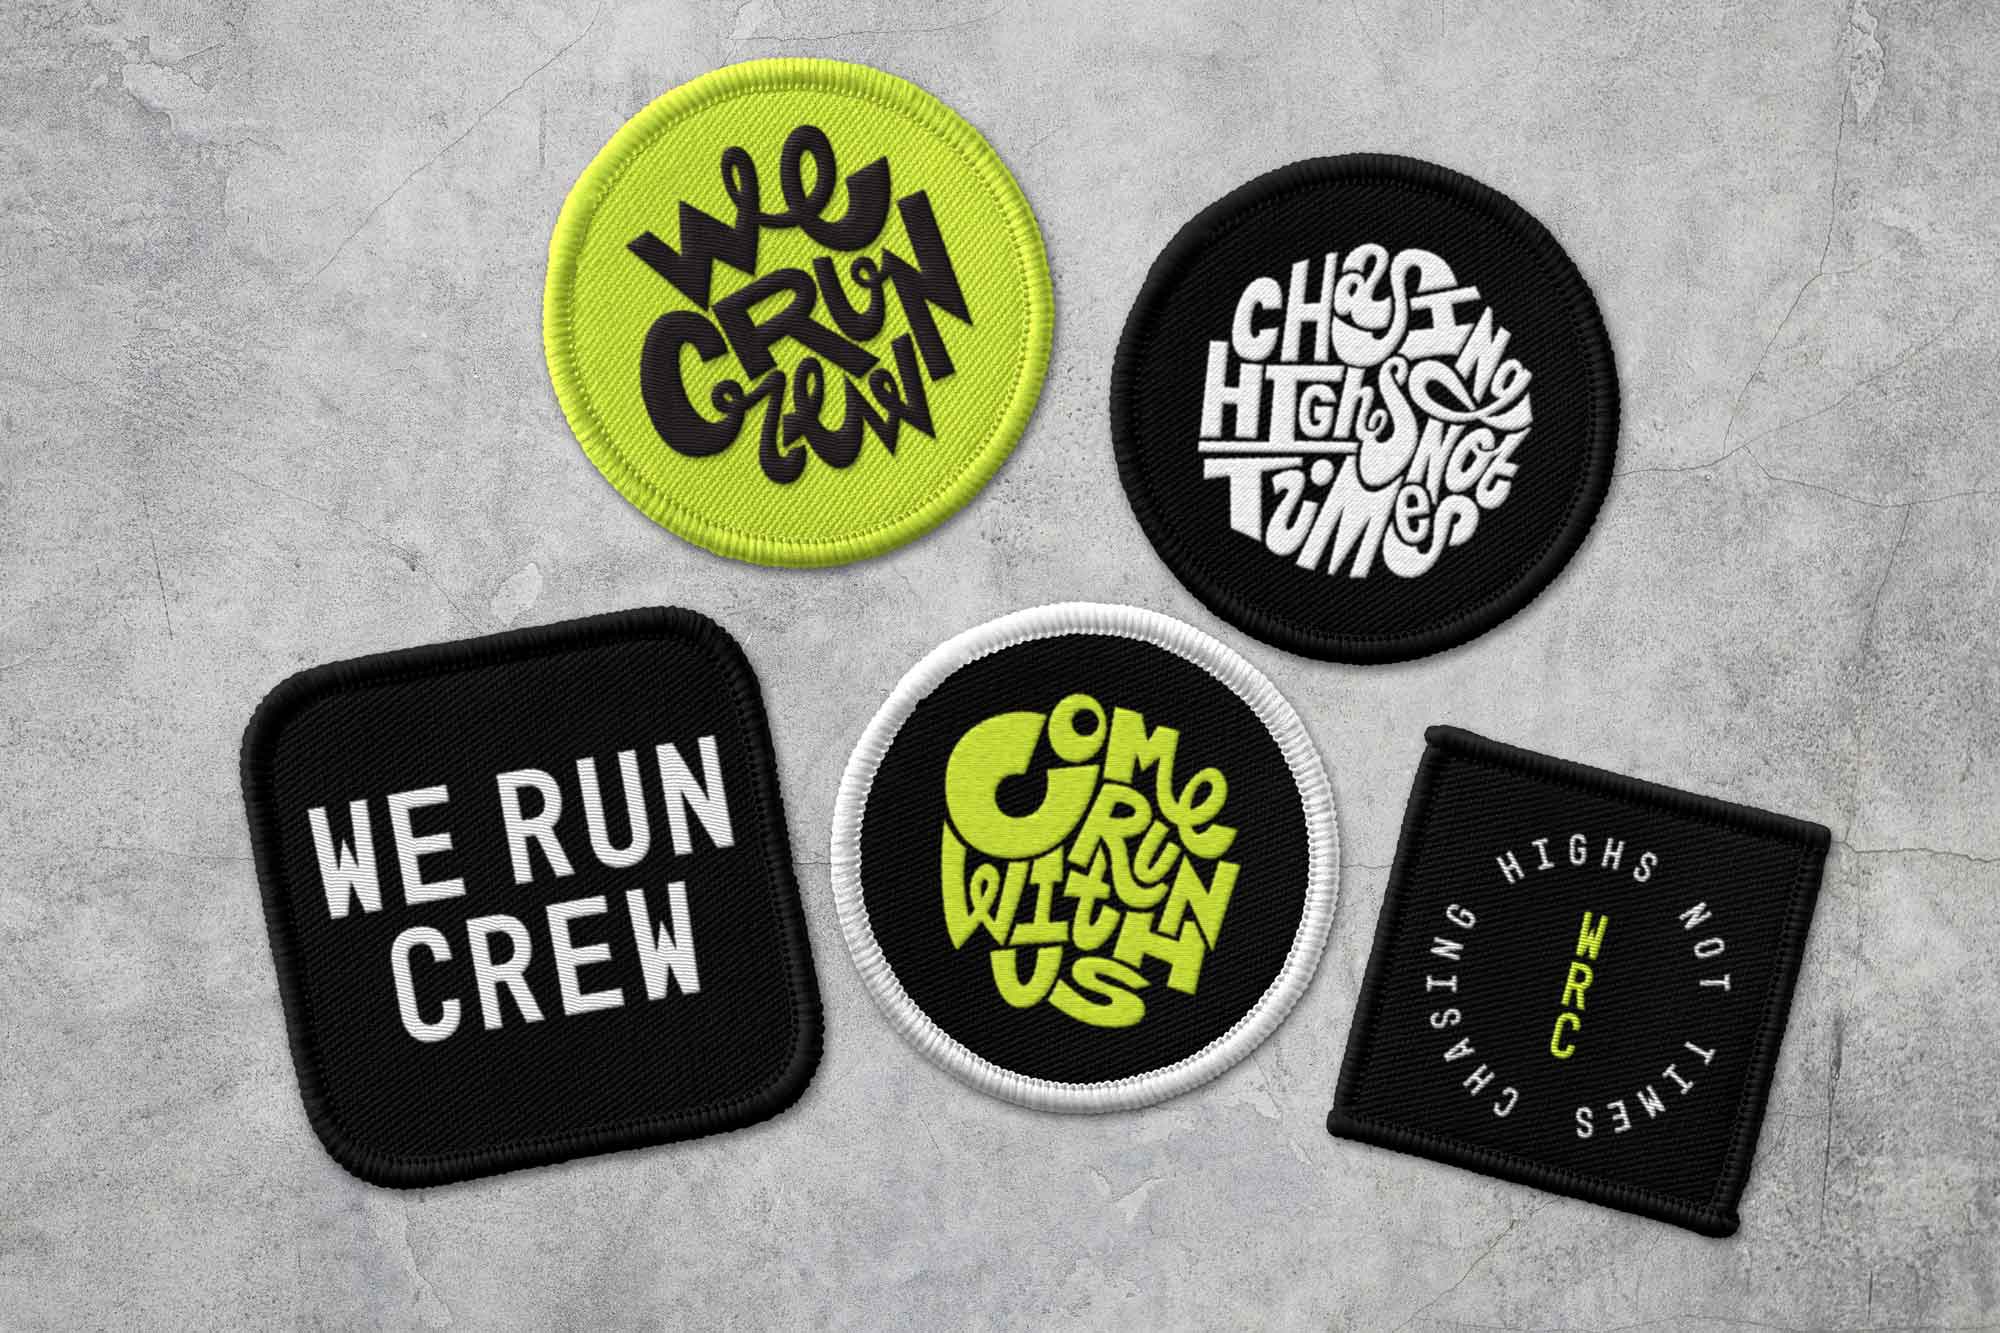 Embroidered patches for We Run Crew